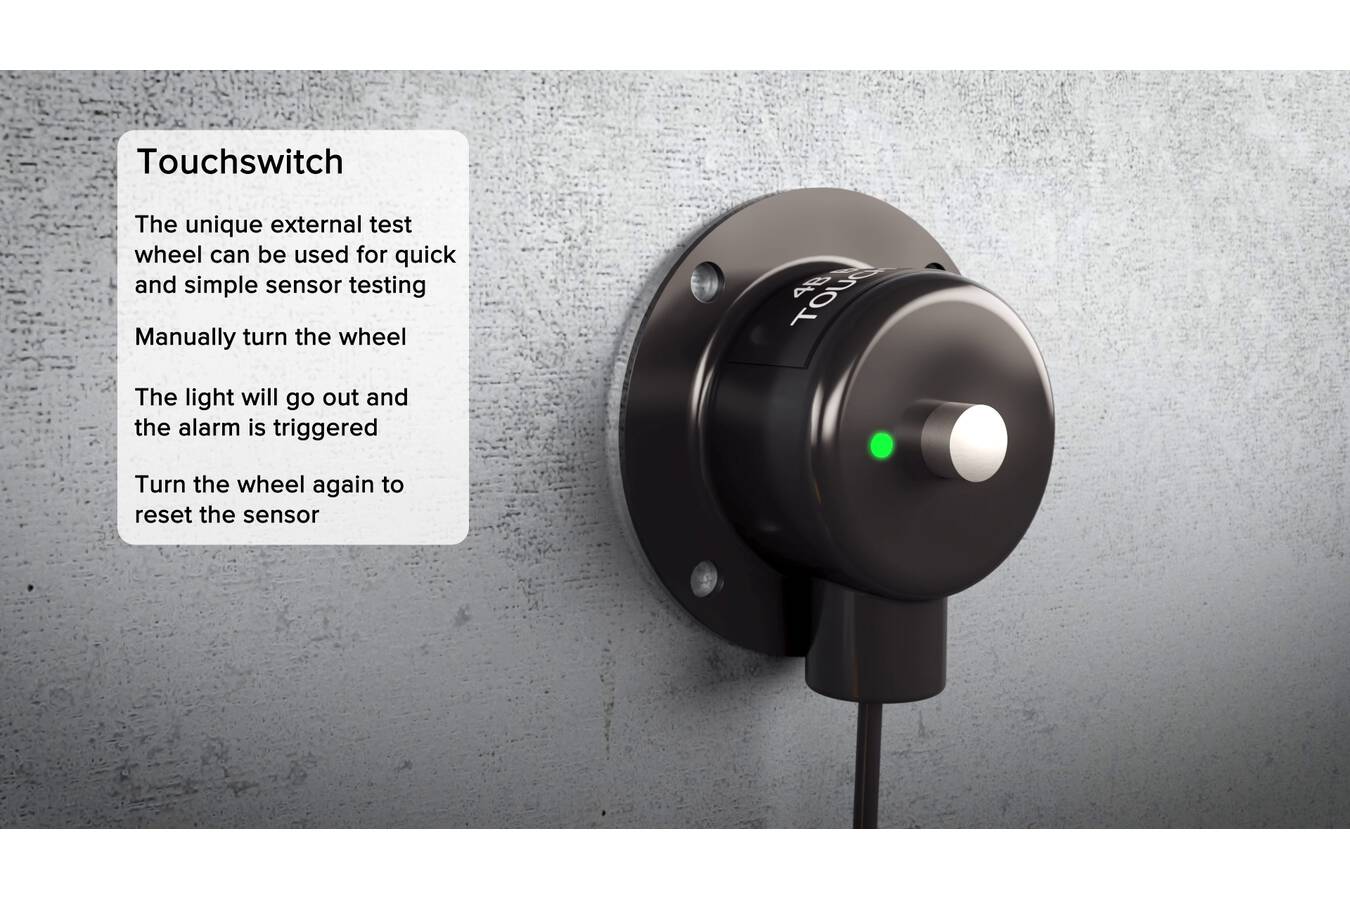 Test button allows easy testing of Touchswitch